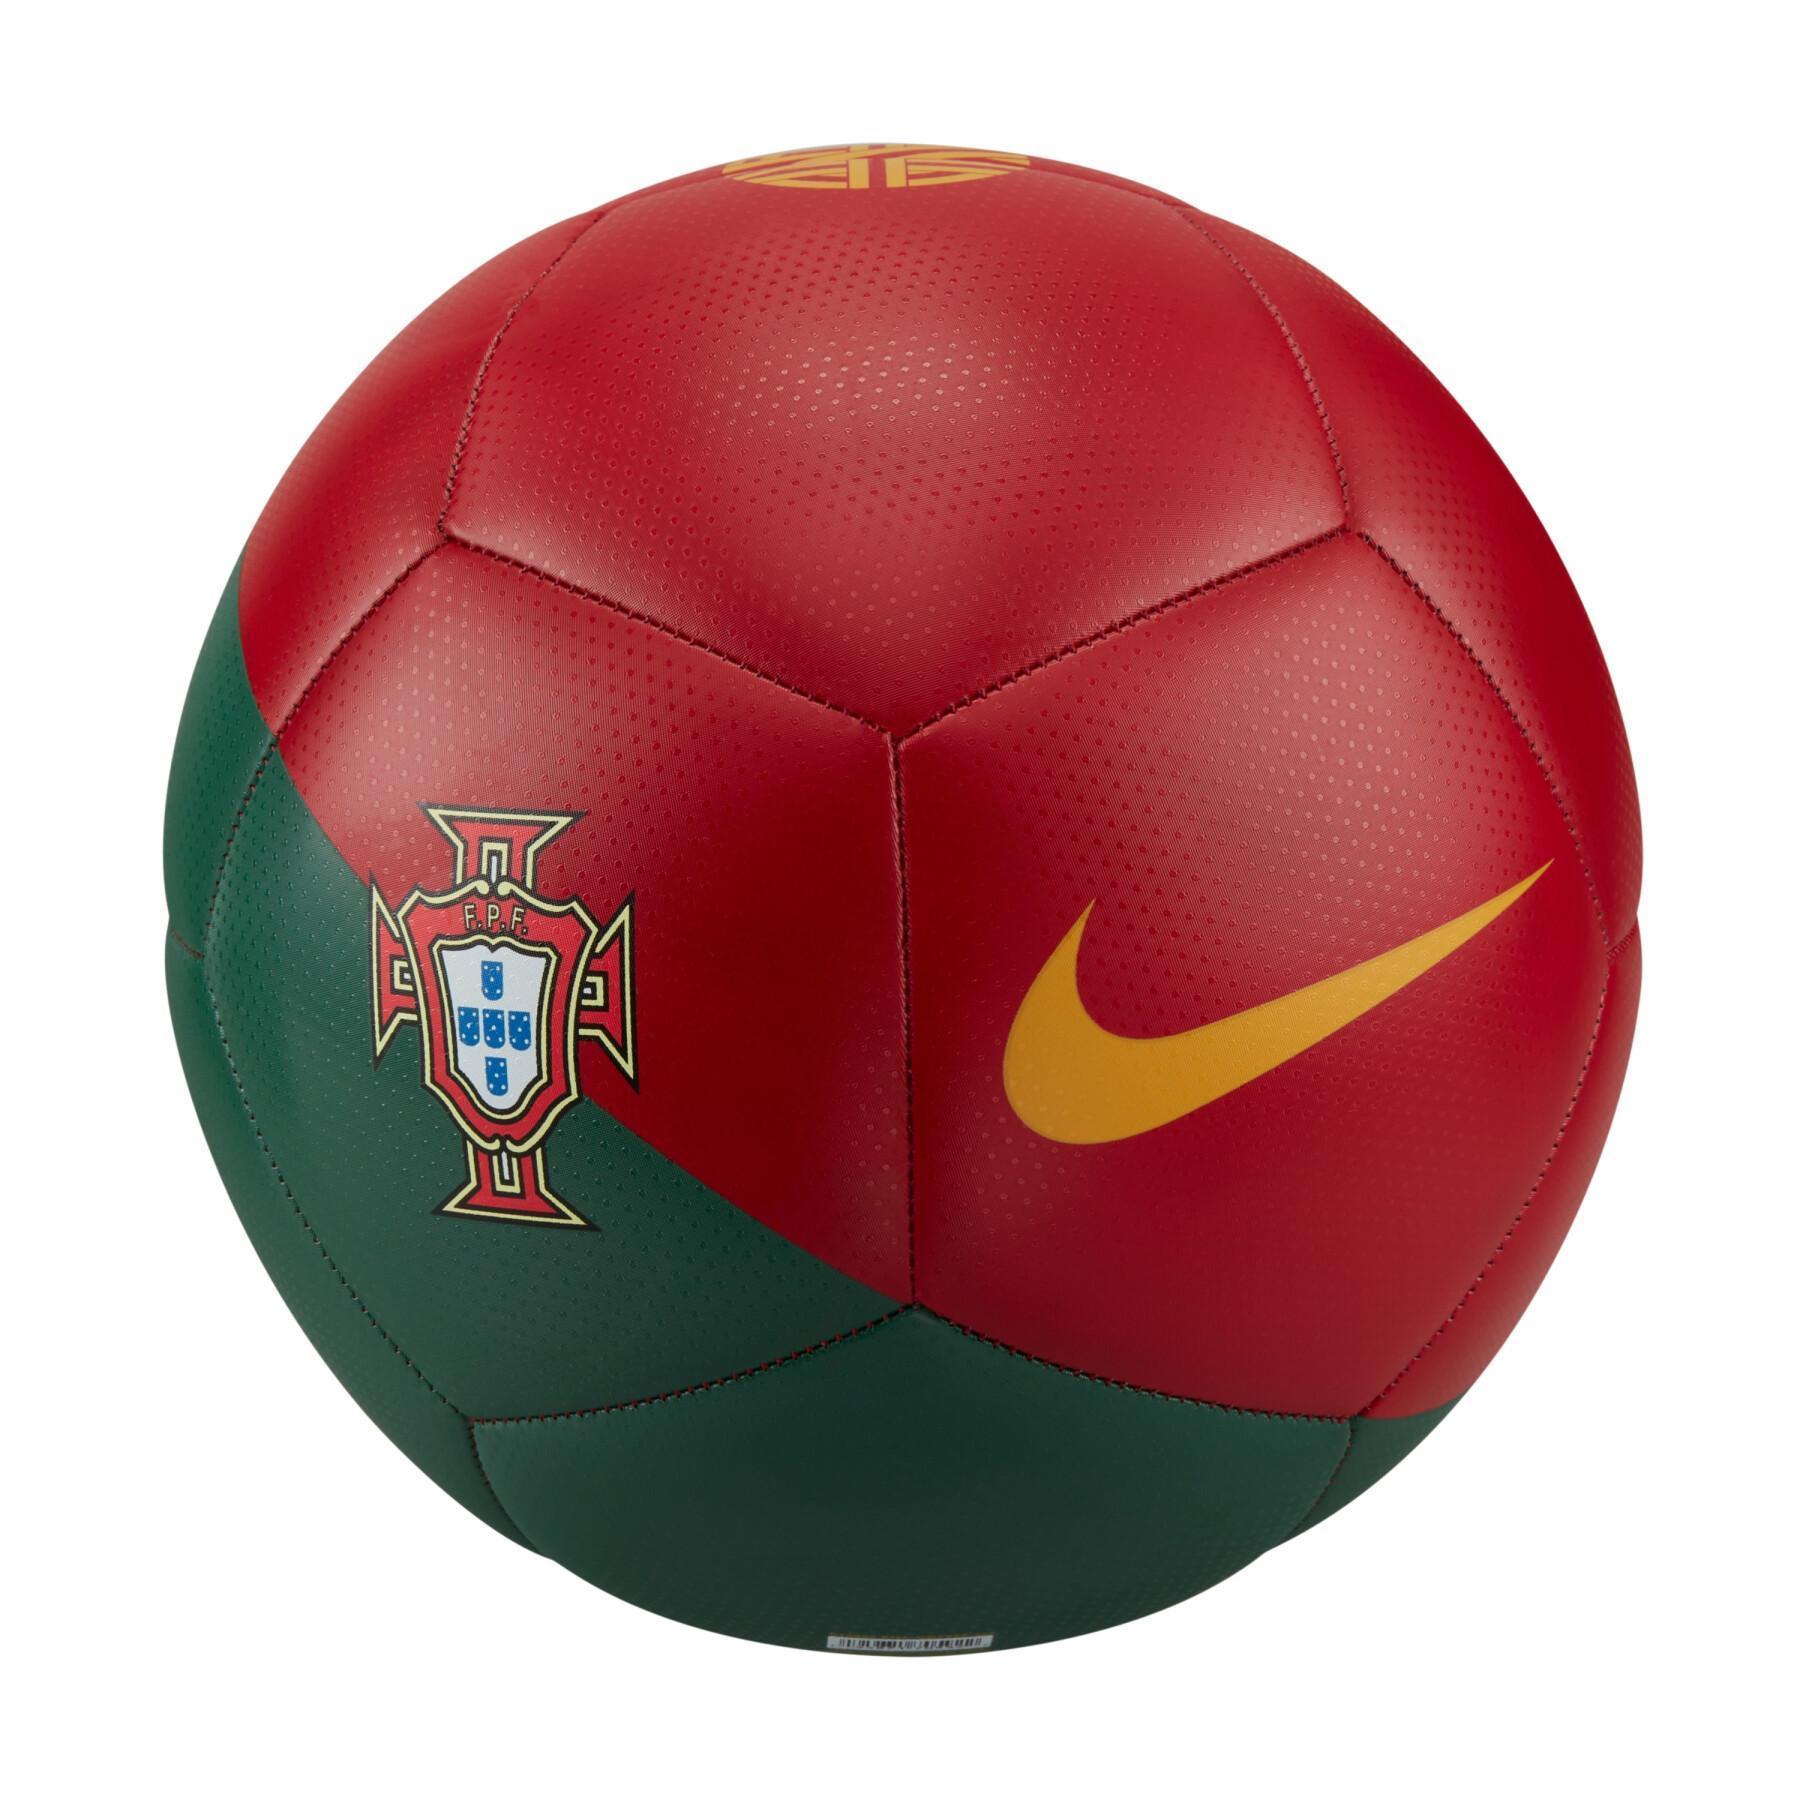 World cup 2022 ball Portugal